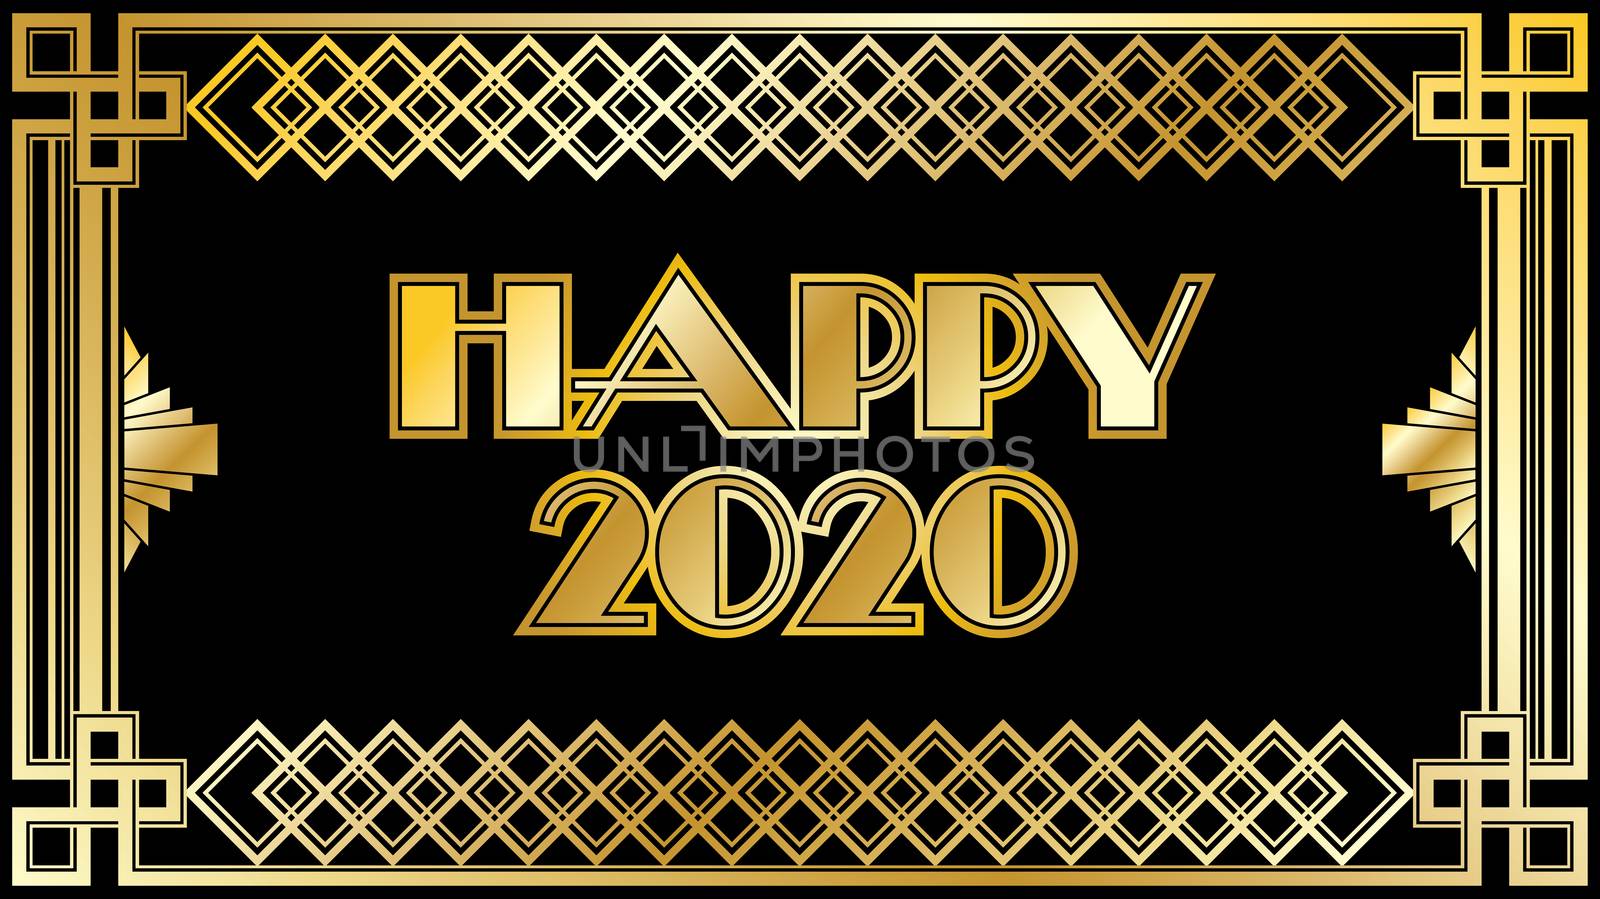 2020 New years Countdown clock changing numeral with festive background and gold type